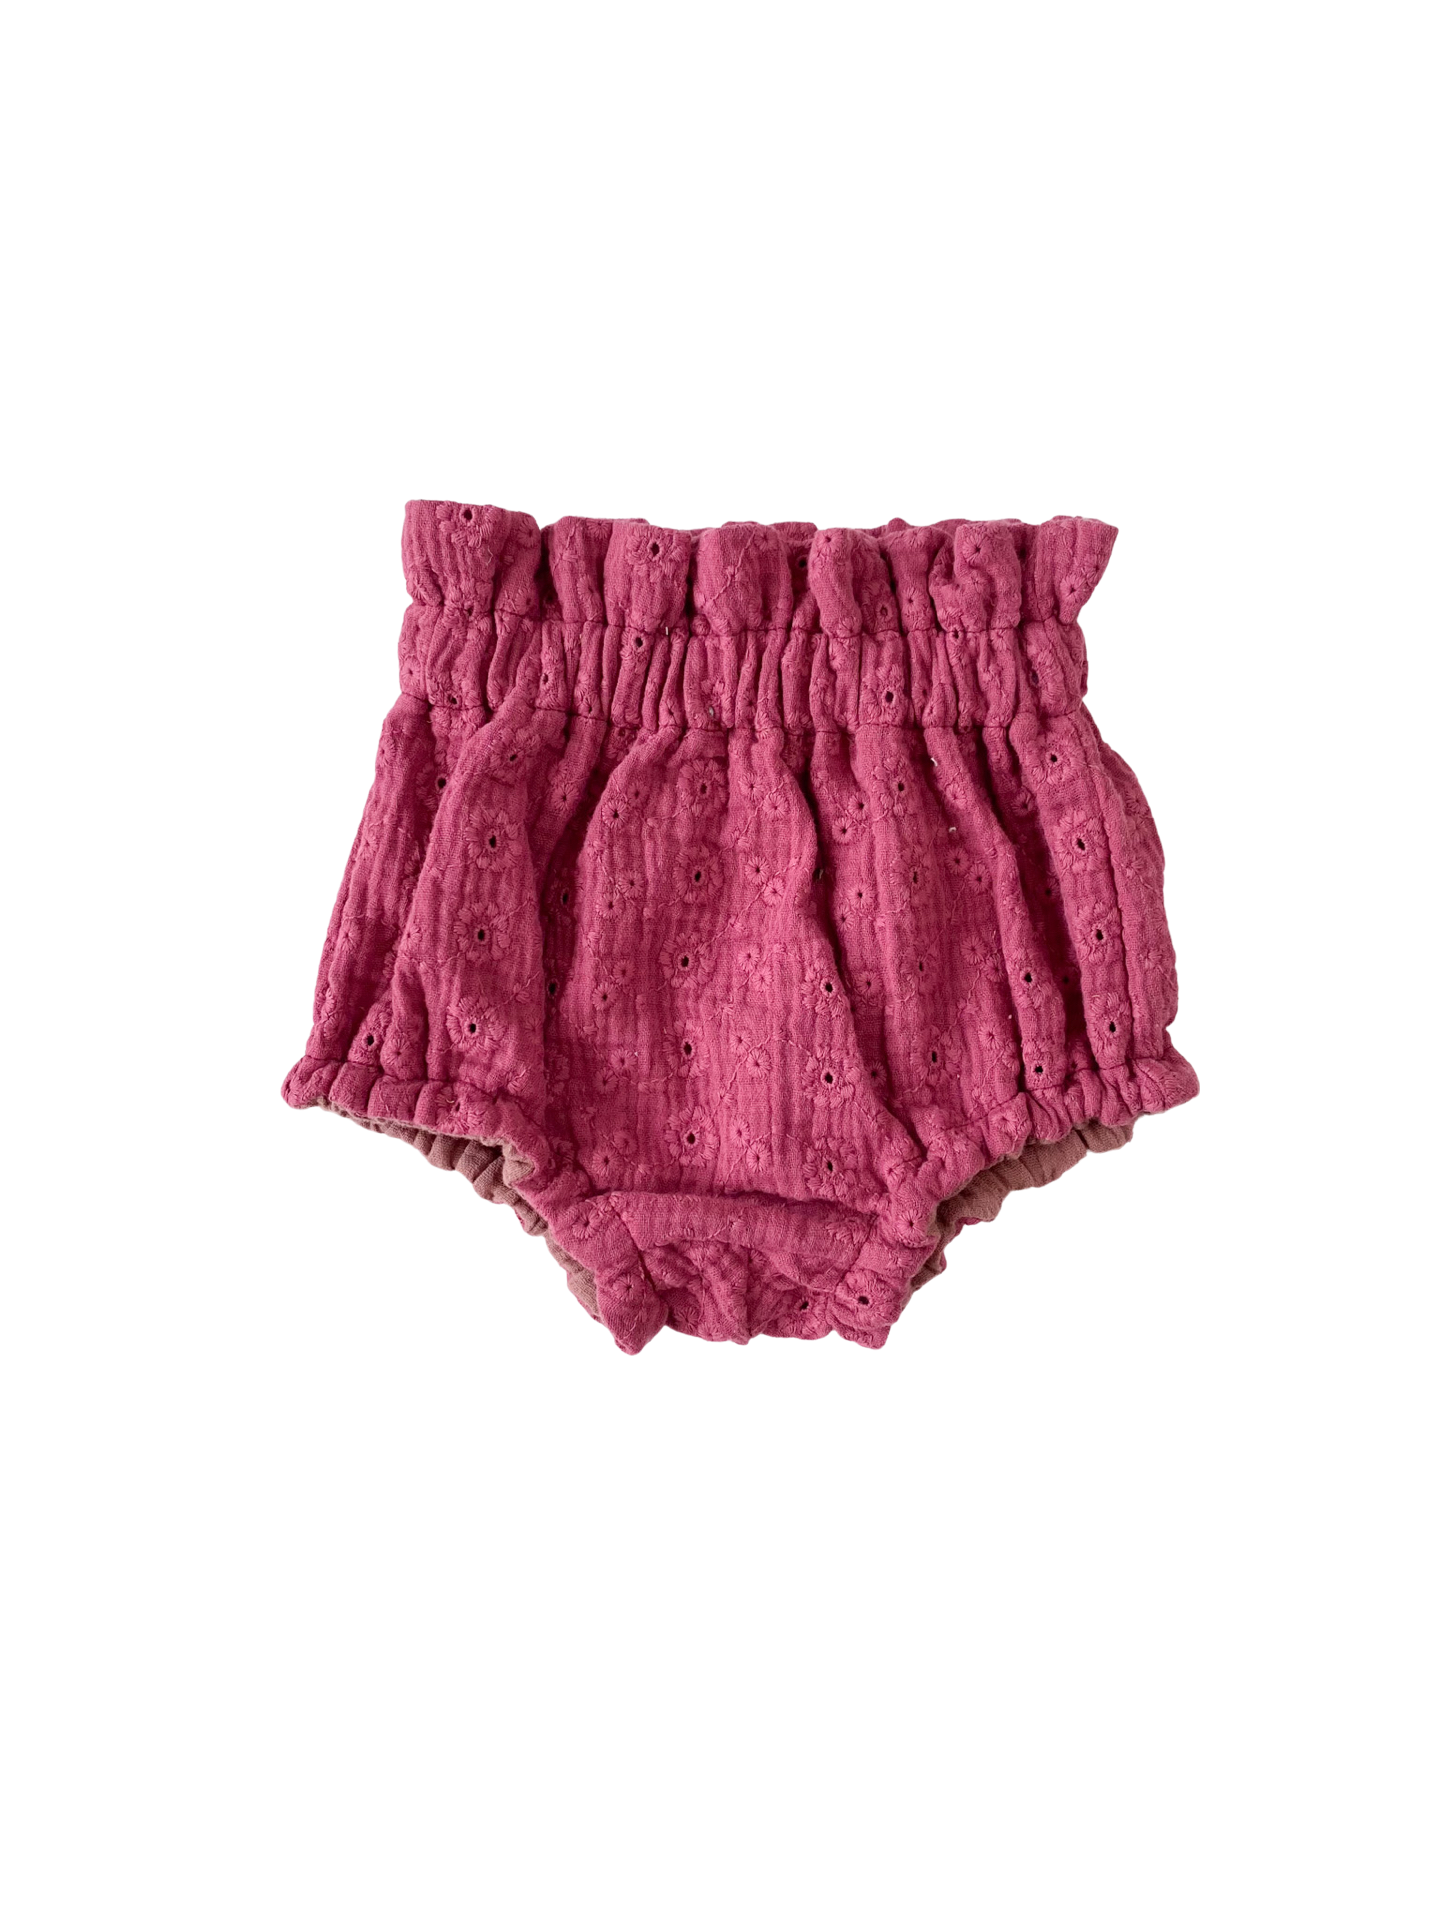 Sophie bloomers / embroidered raspberry